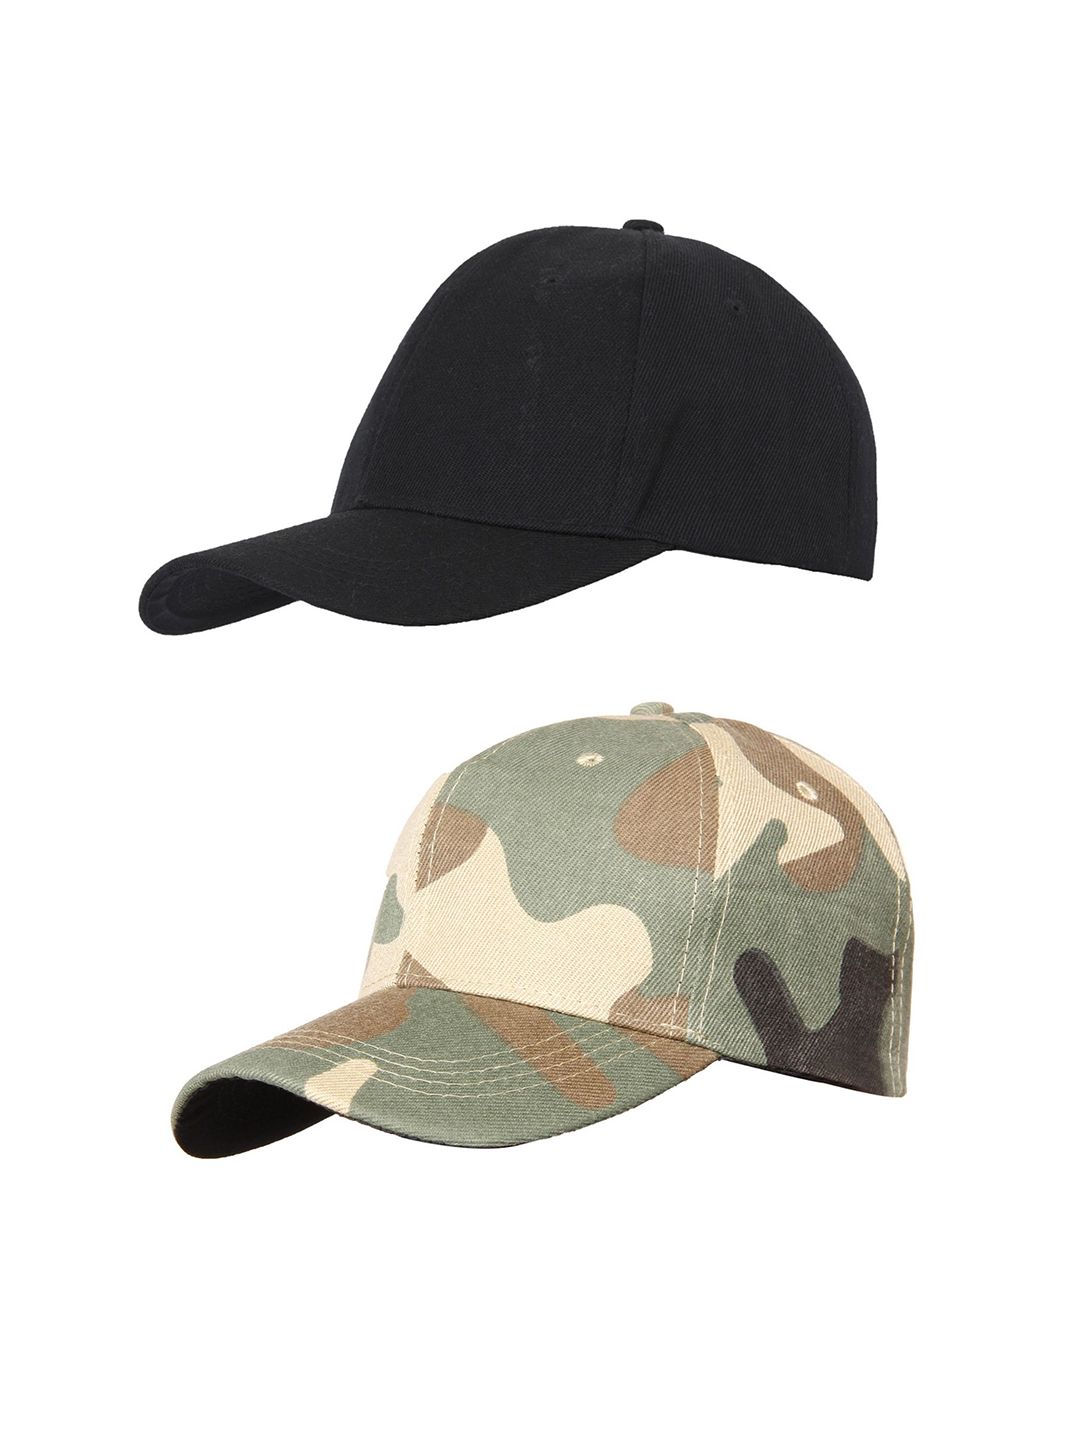 FabSeasons Unisex Set of 2 Black & Olive Green Cotton Baseball Caps Price in India